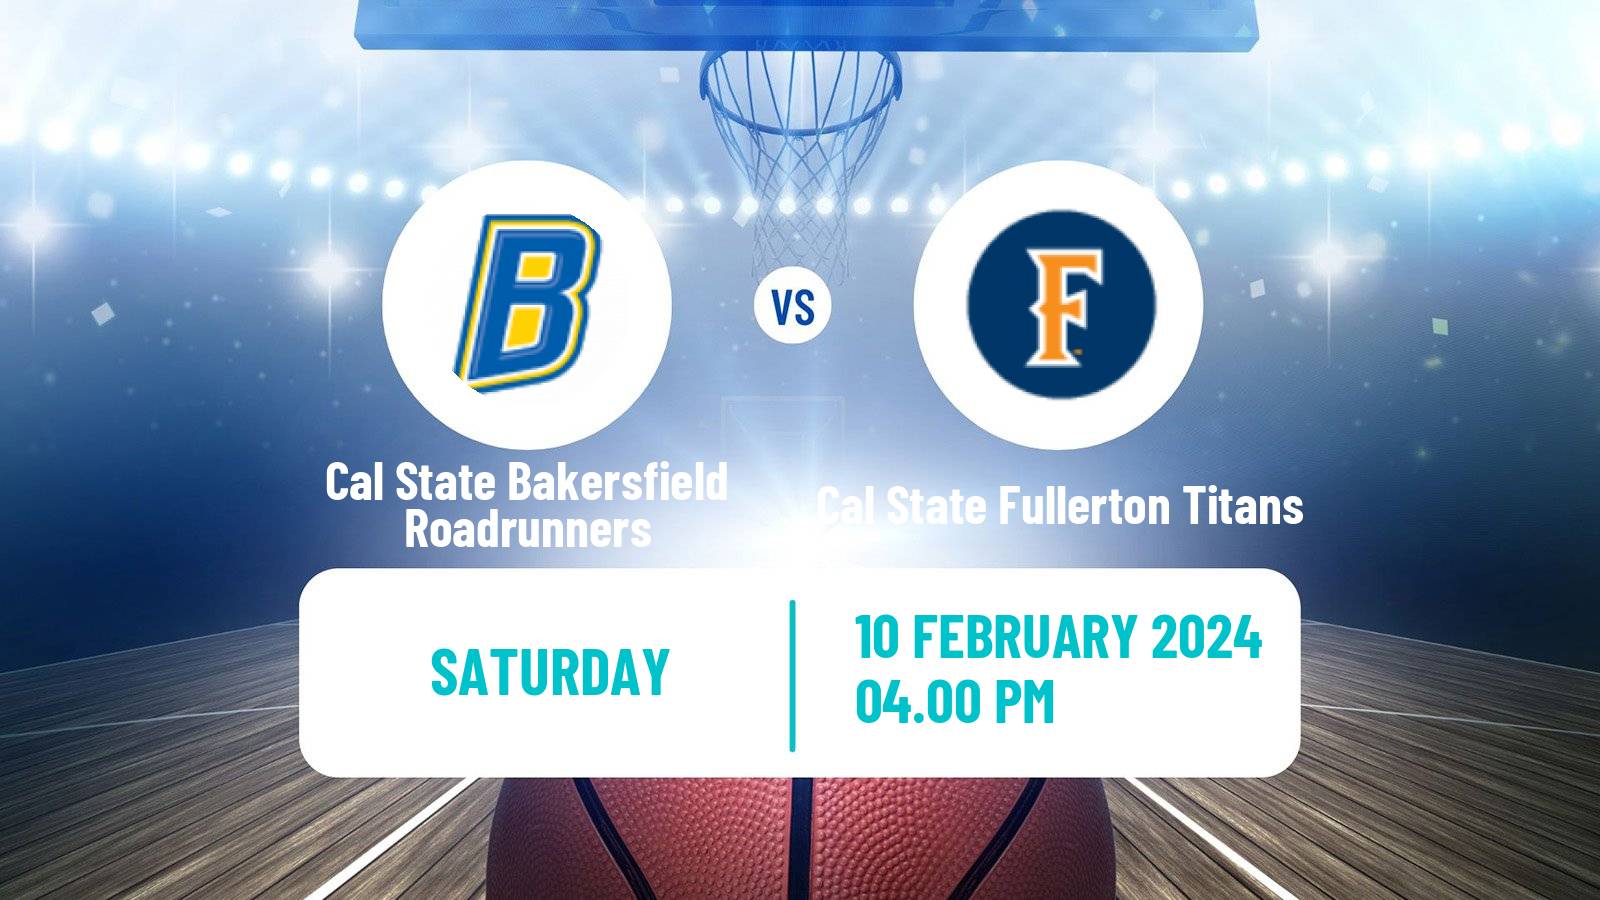 Basketball NCAA College Basketball Cal State Bakersfield Roadrunners - Cal State Fullerton Titans